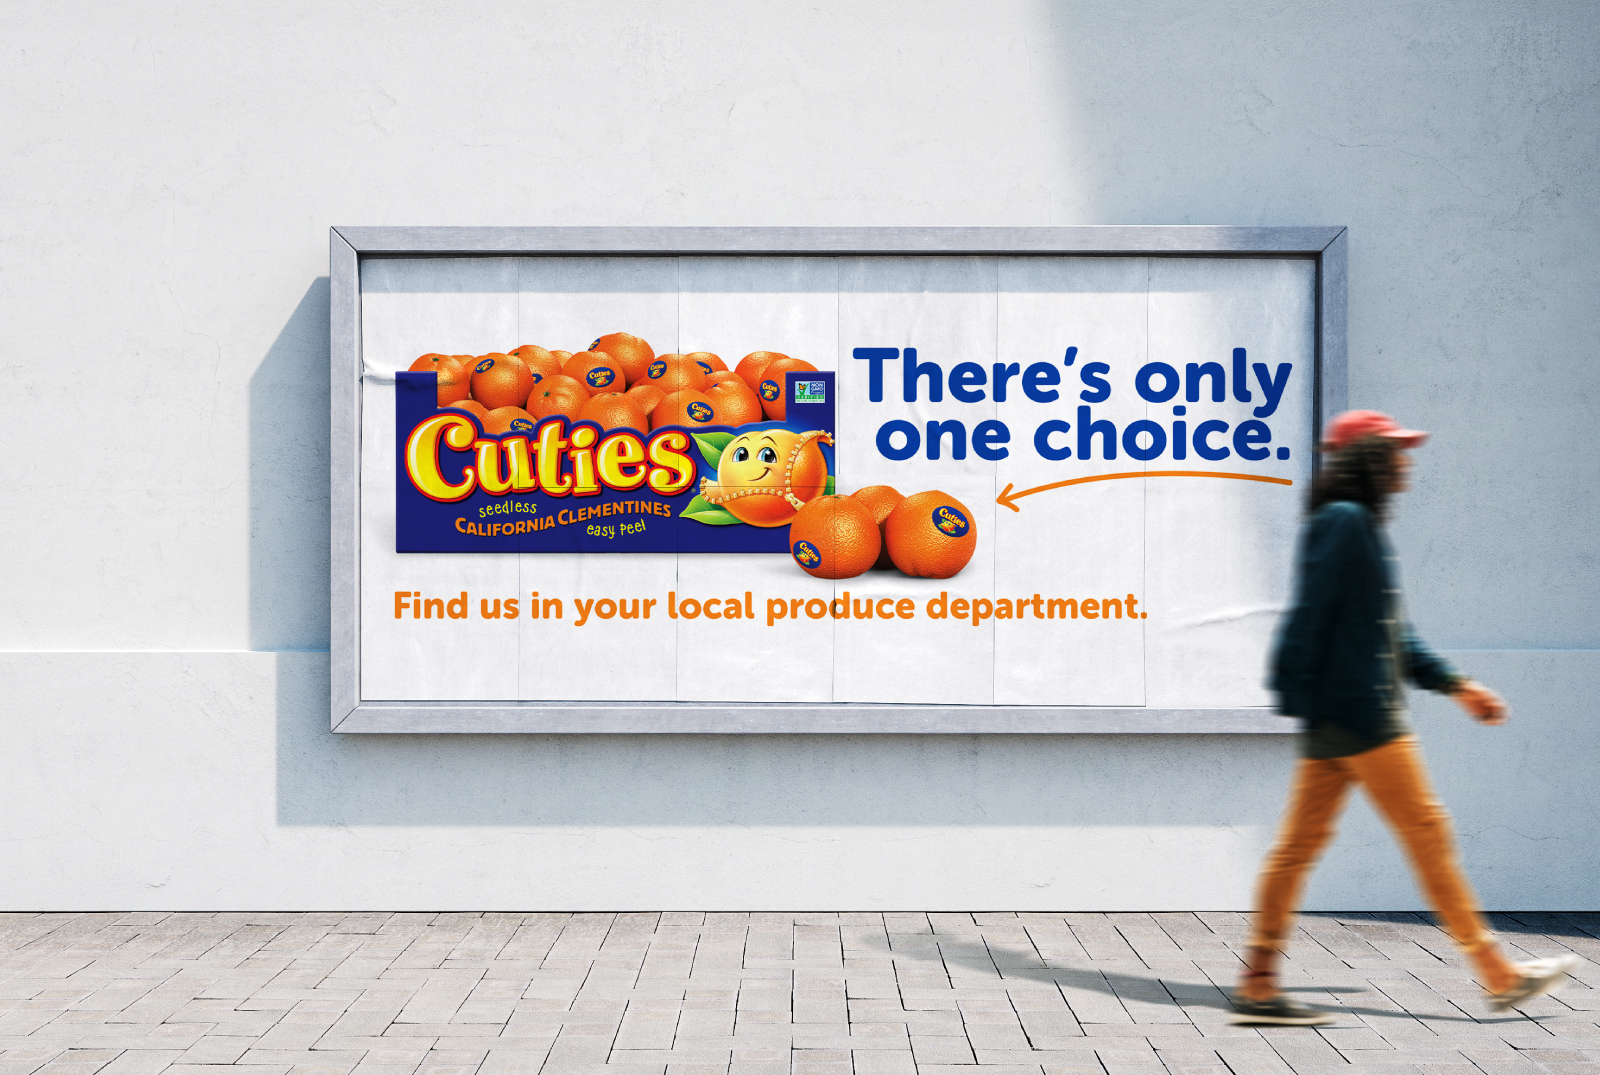 A mock-up of a Cuties billboard that says "There's only one choice. Find us in your local produce department."